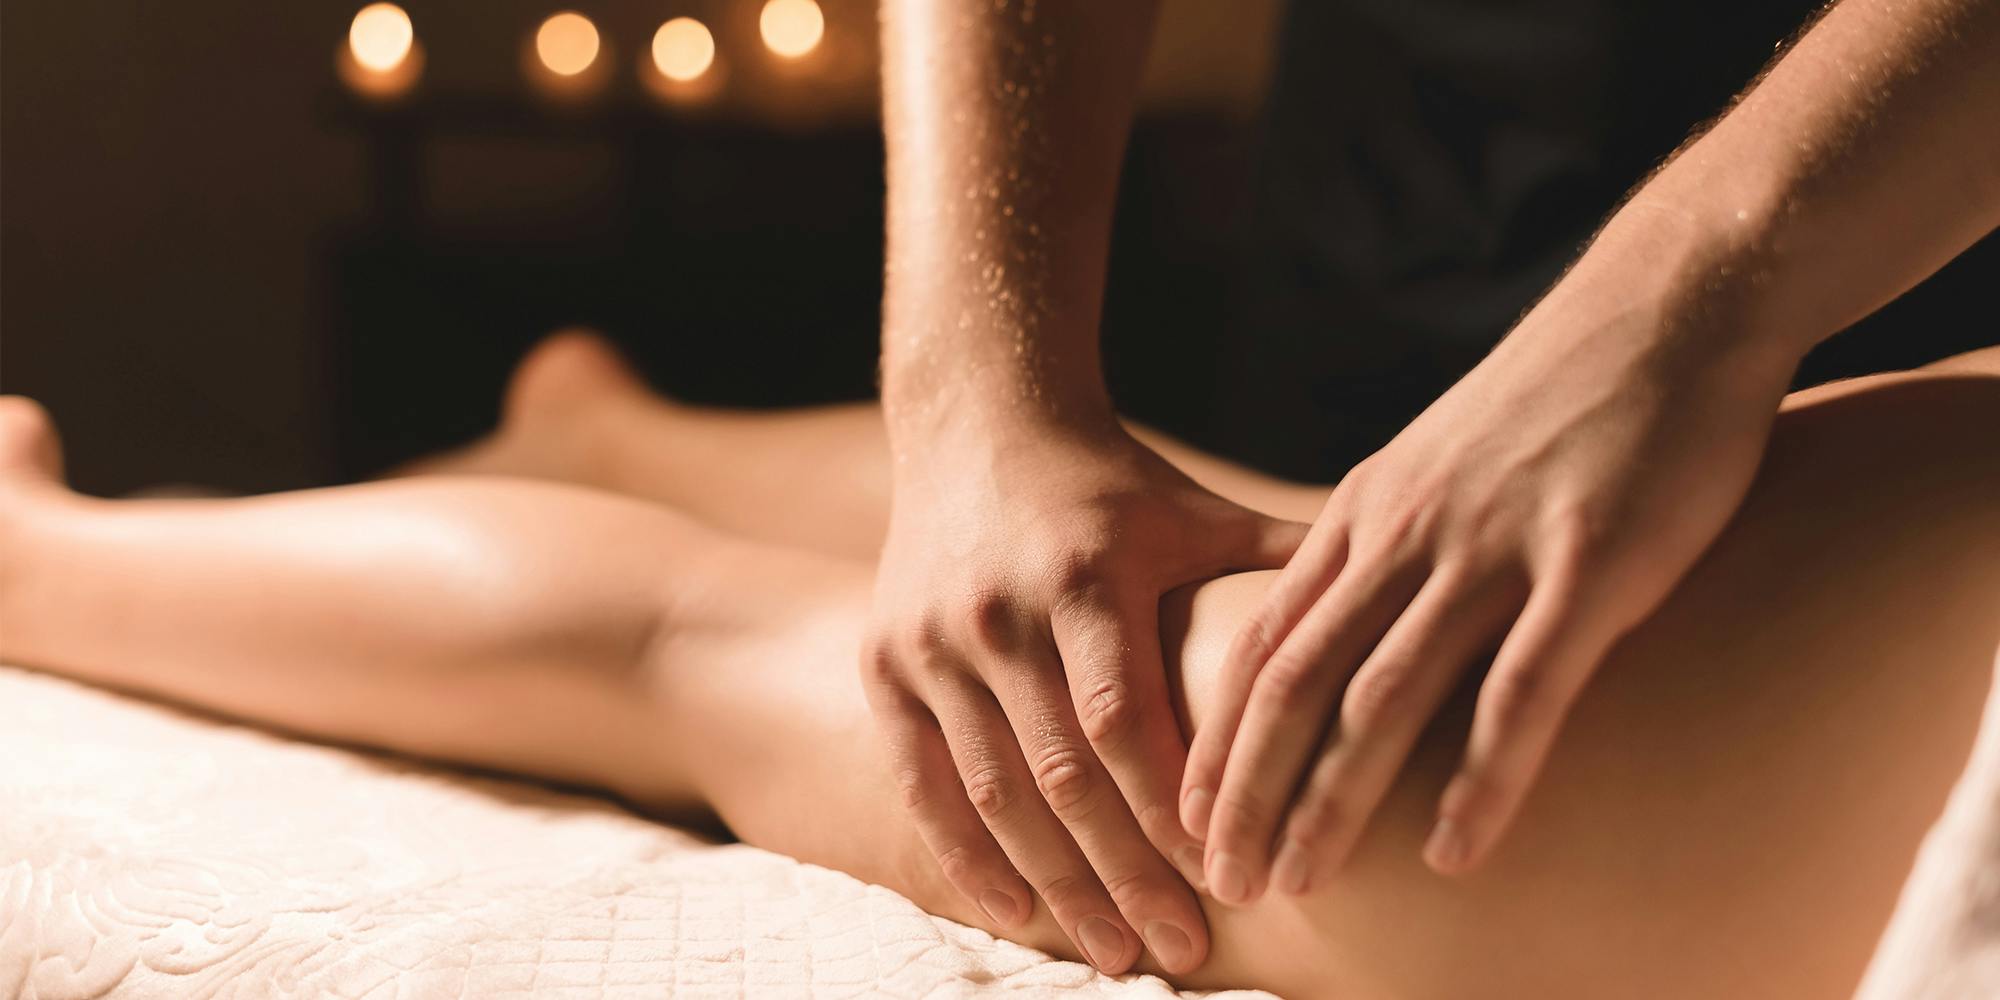 22 massage porn sites that’ll get you in touch with your sensuality